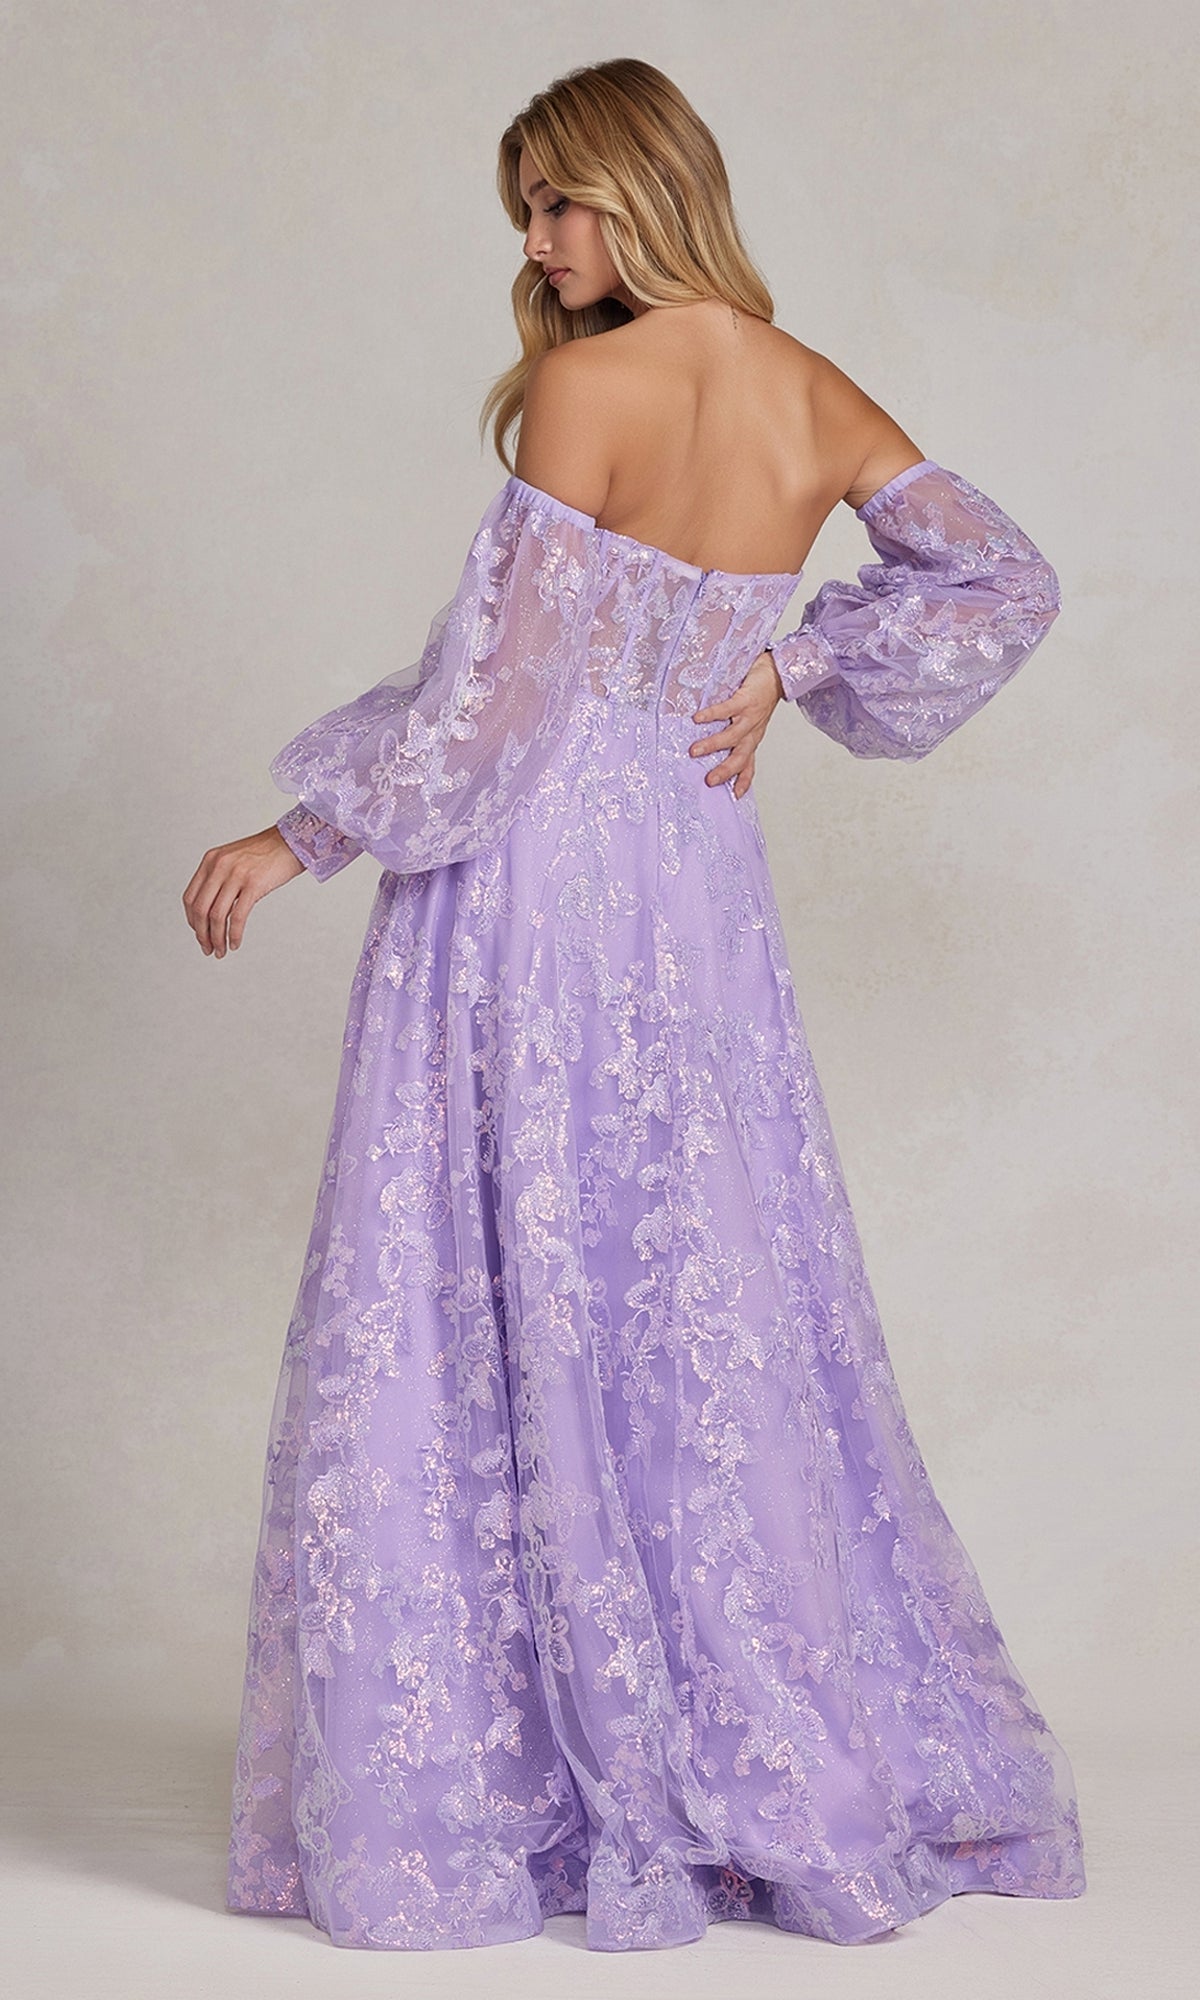  Strapless Long Lace Prom Dress with Puff Sleeves